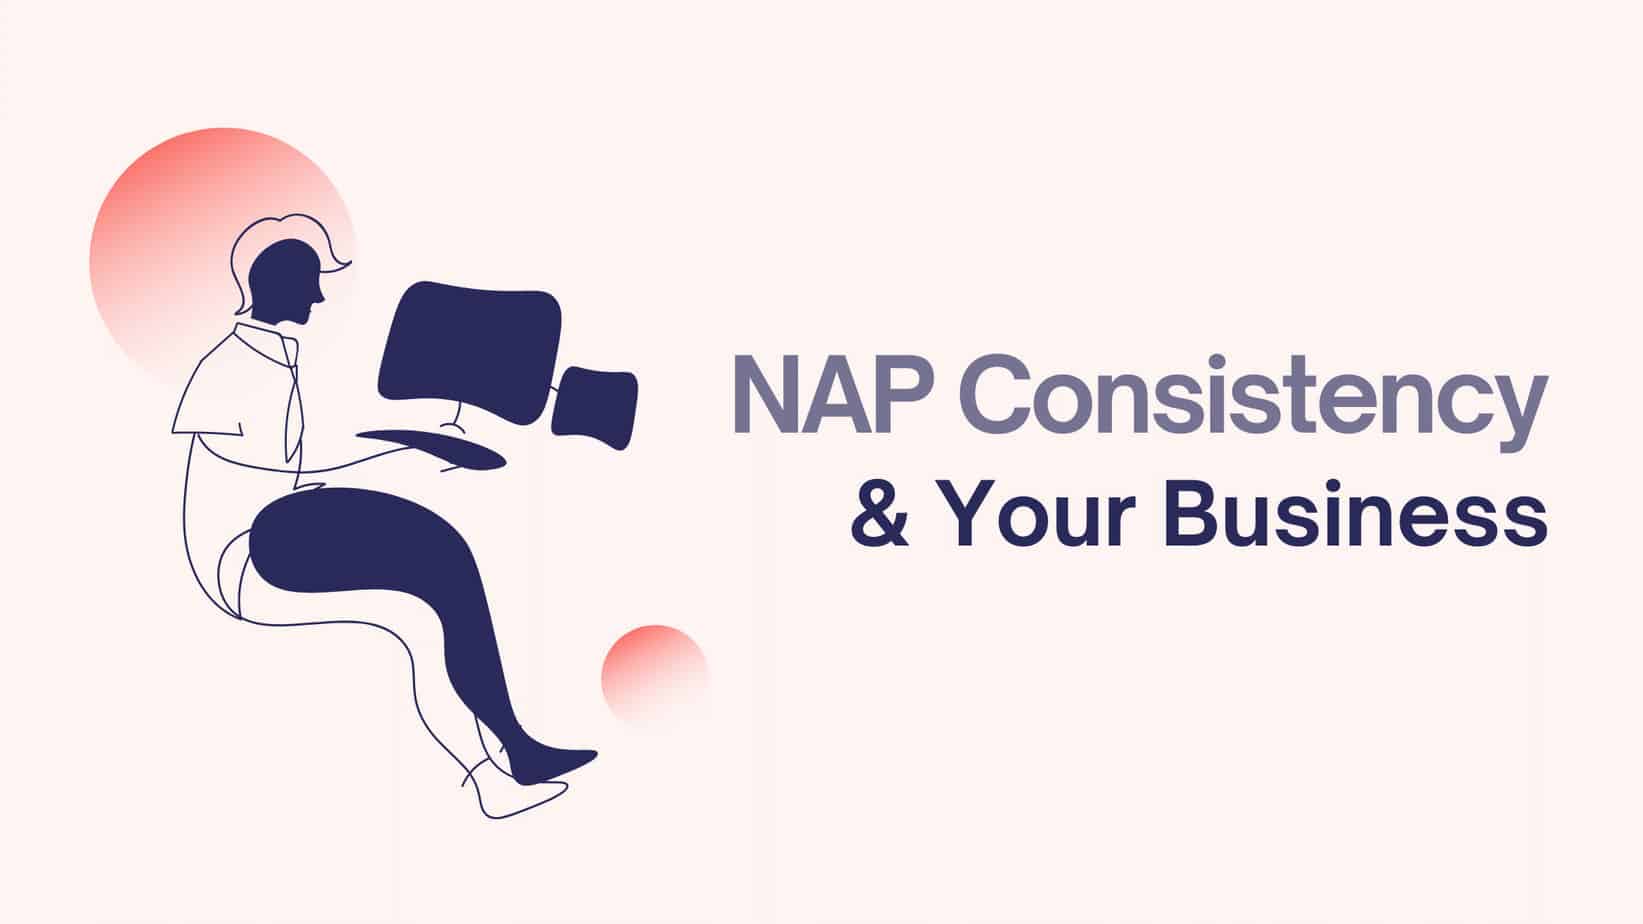 Featured image for “NAP Consistency & Your Business”